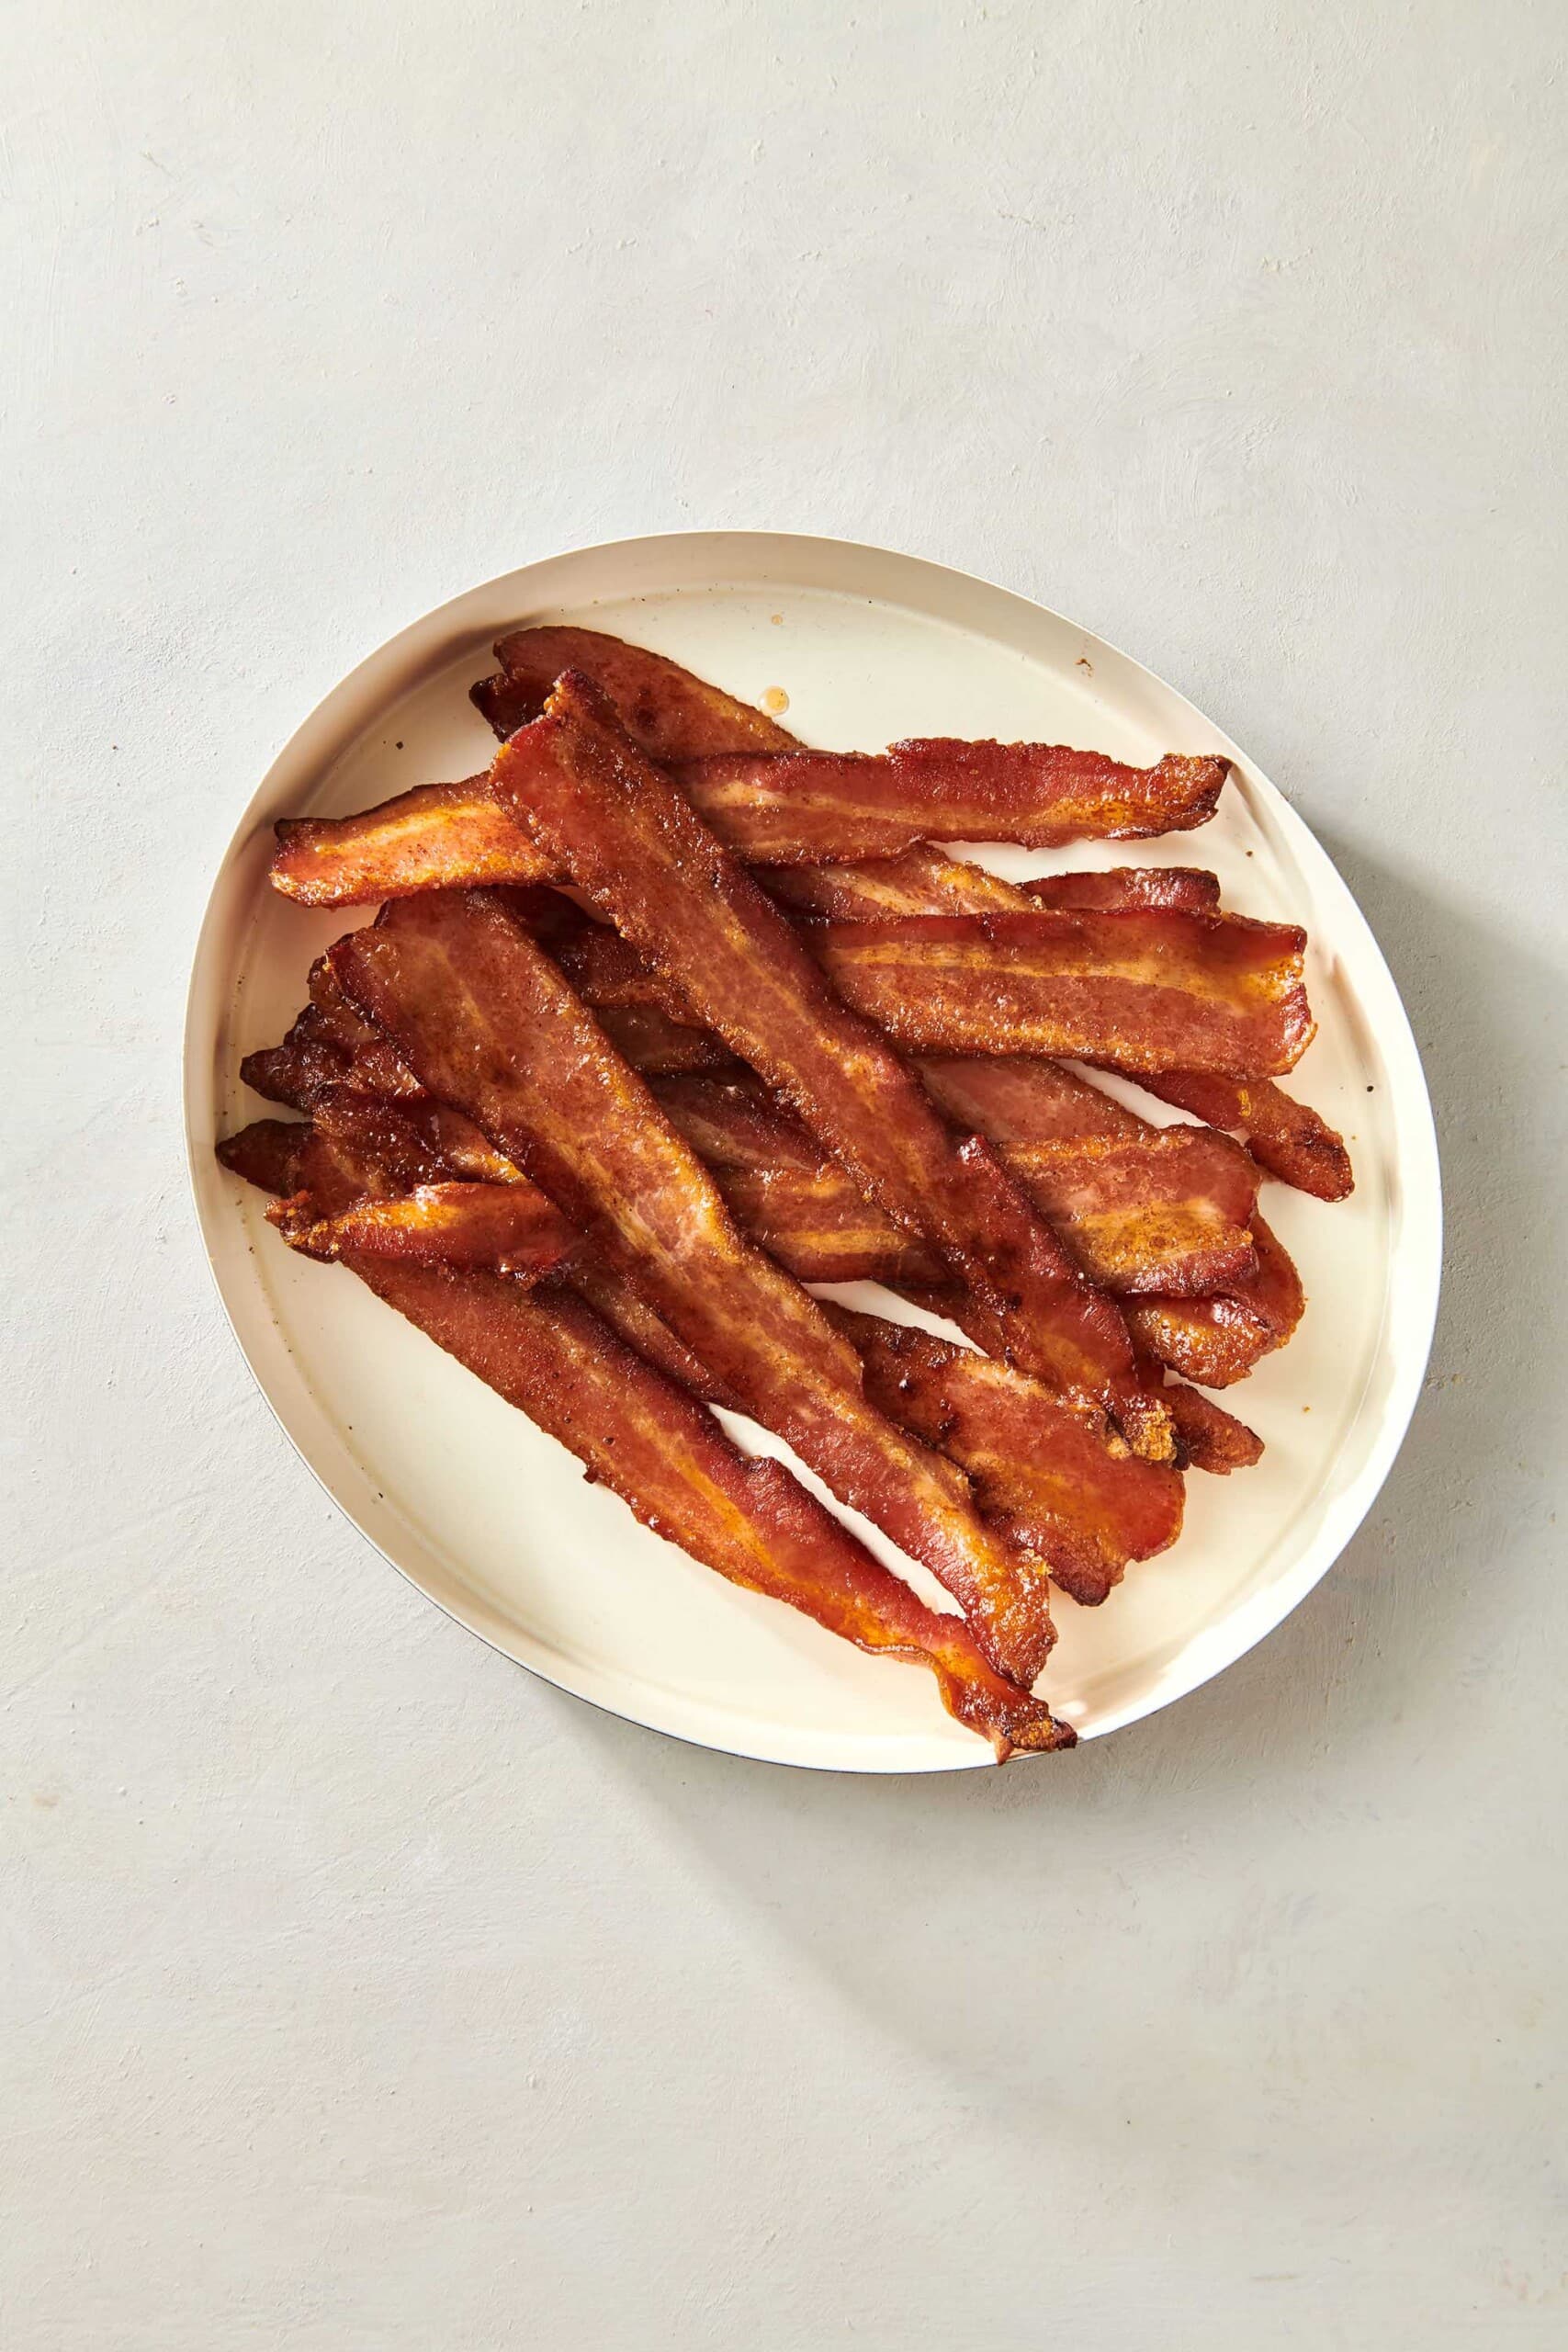 Candied Bacon piled on white plate.